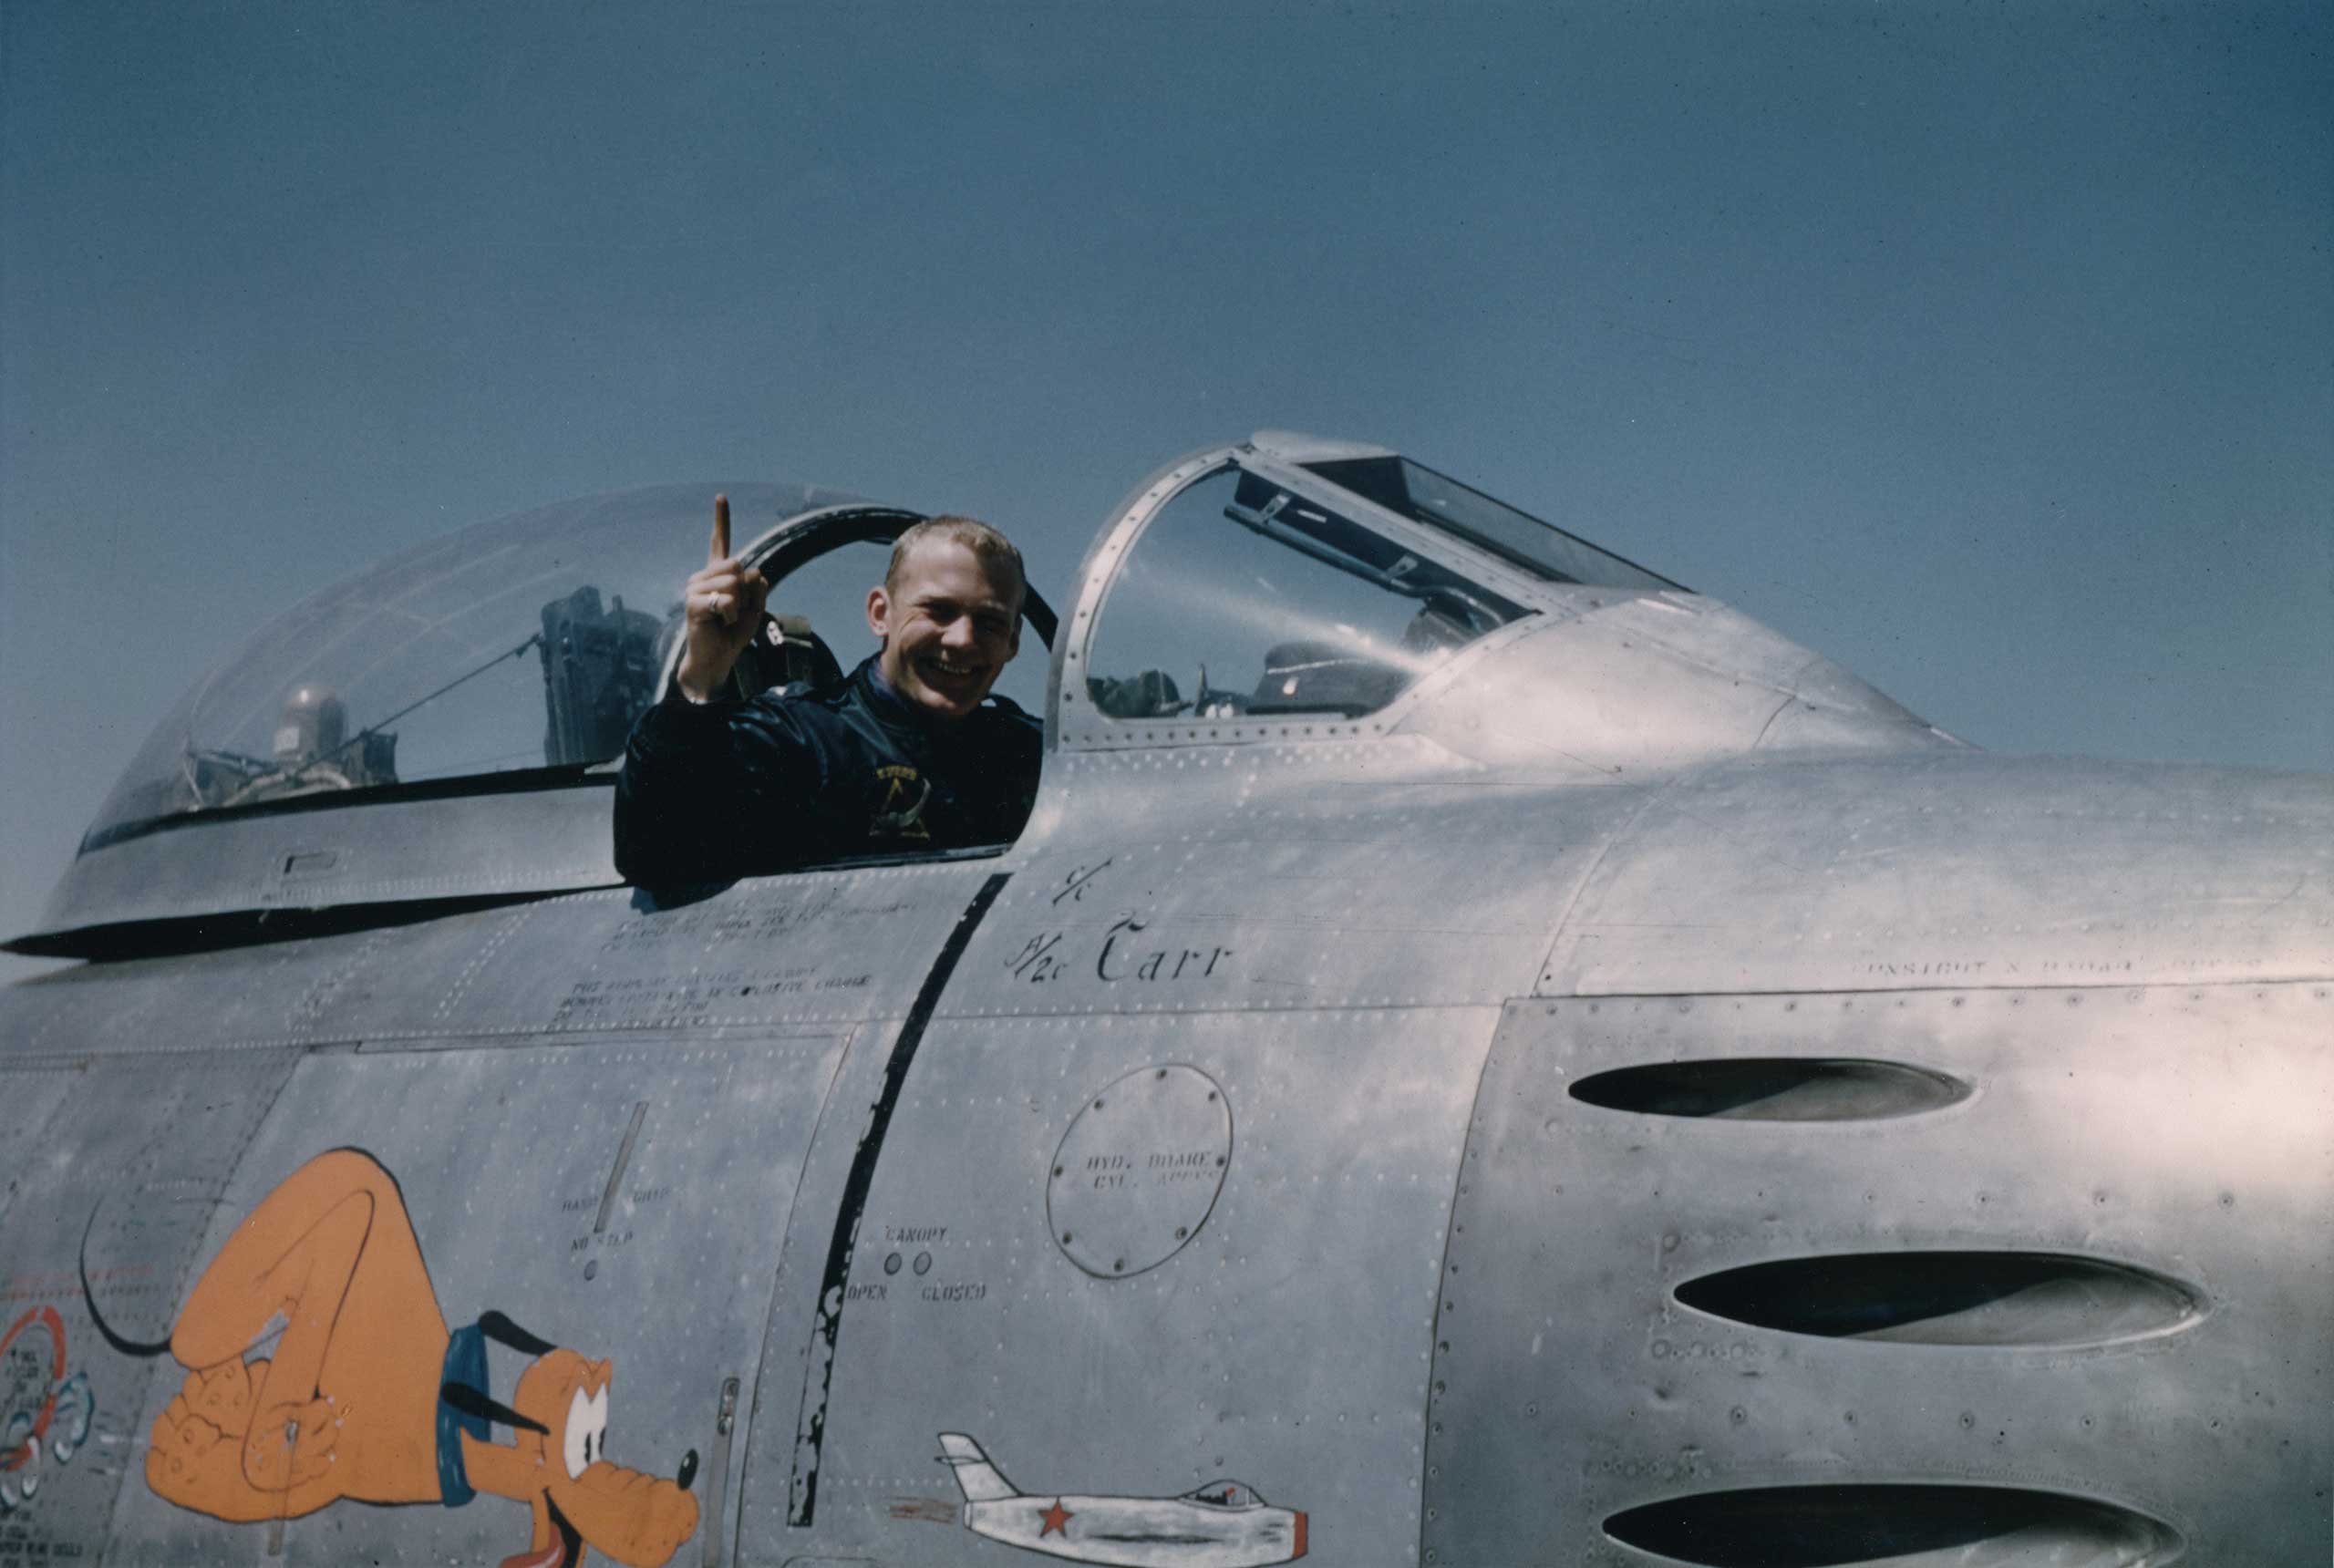 In 1951, Aldrin joined the U.S. Air Force as a Second Lieutenant. He would go on to fly F-86 Sabre Jets in 66 combat missions during  Korean War.